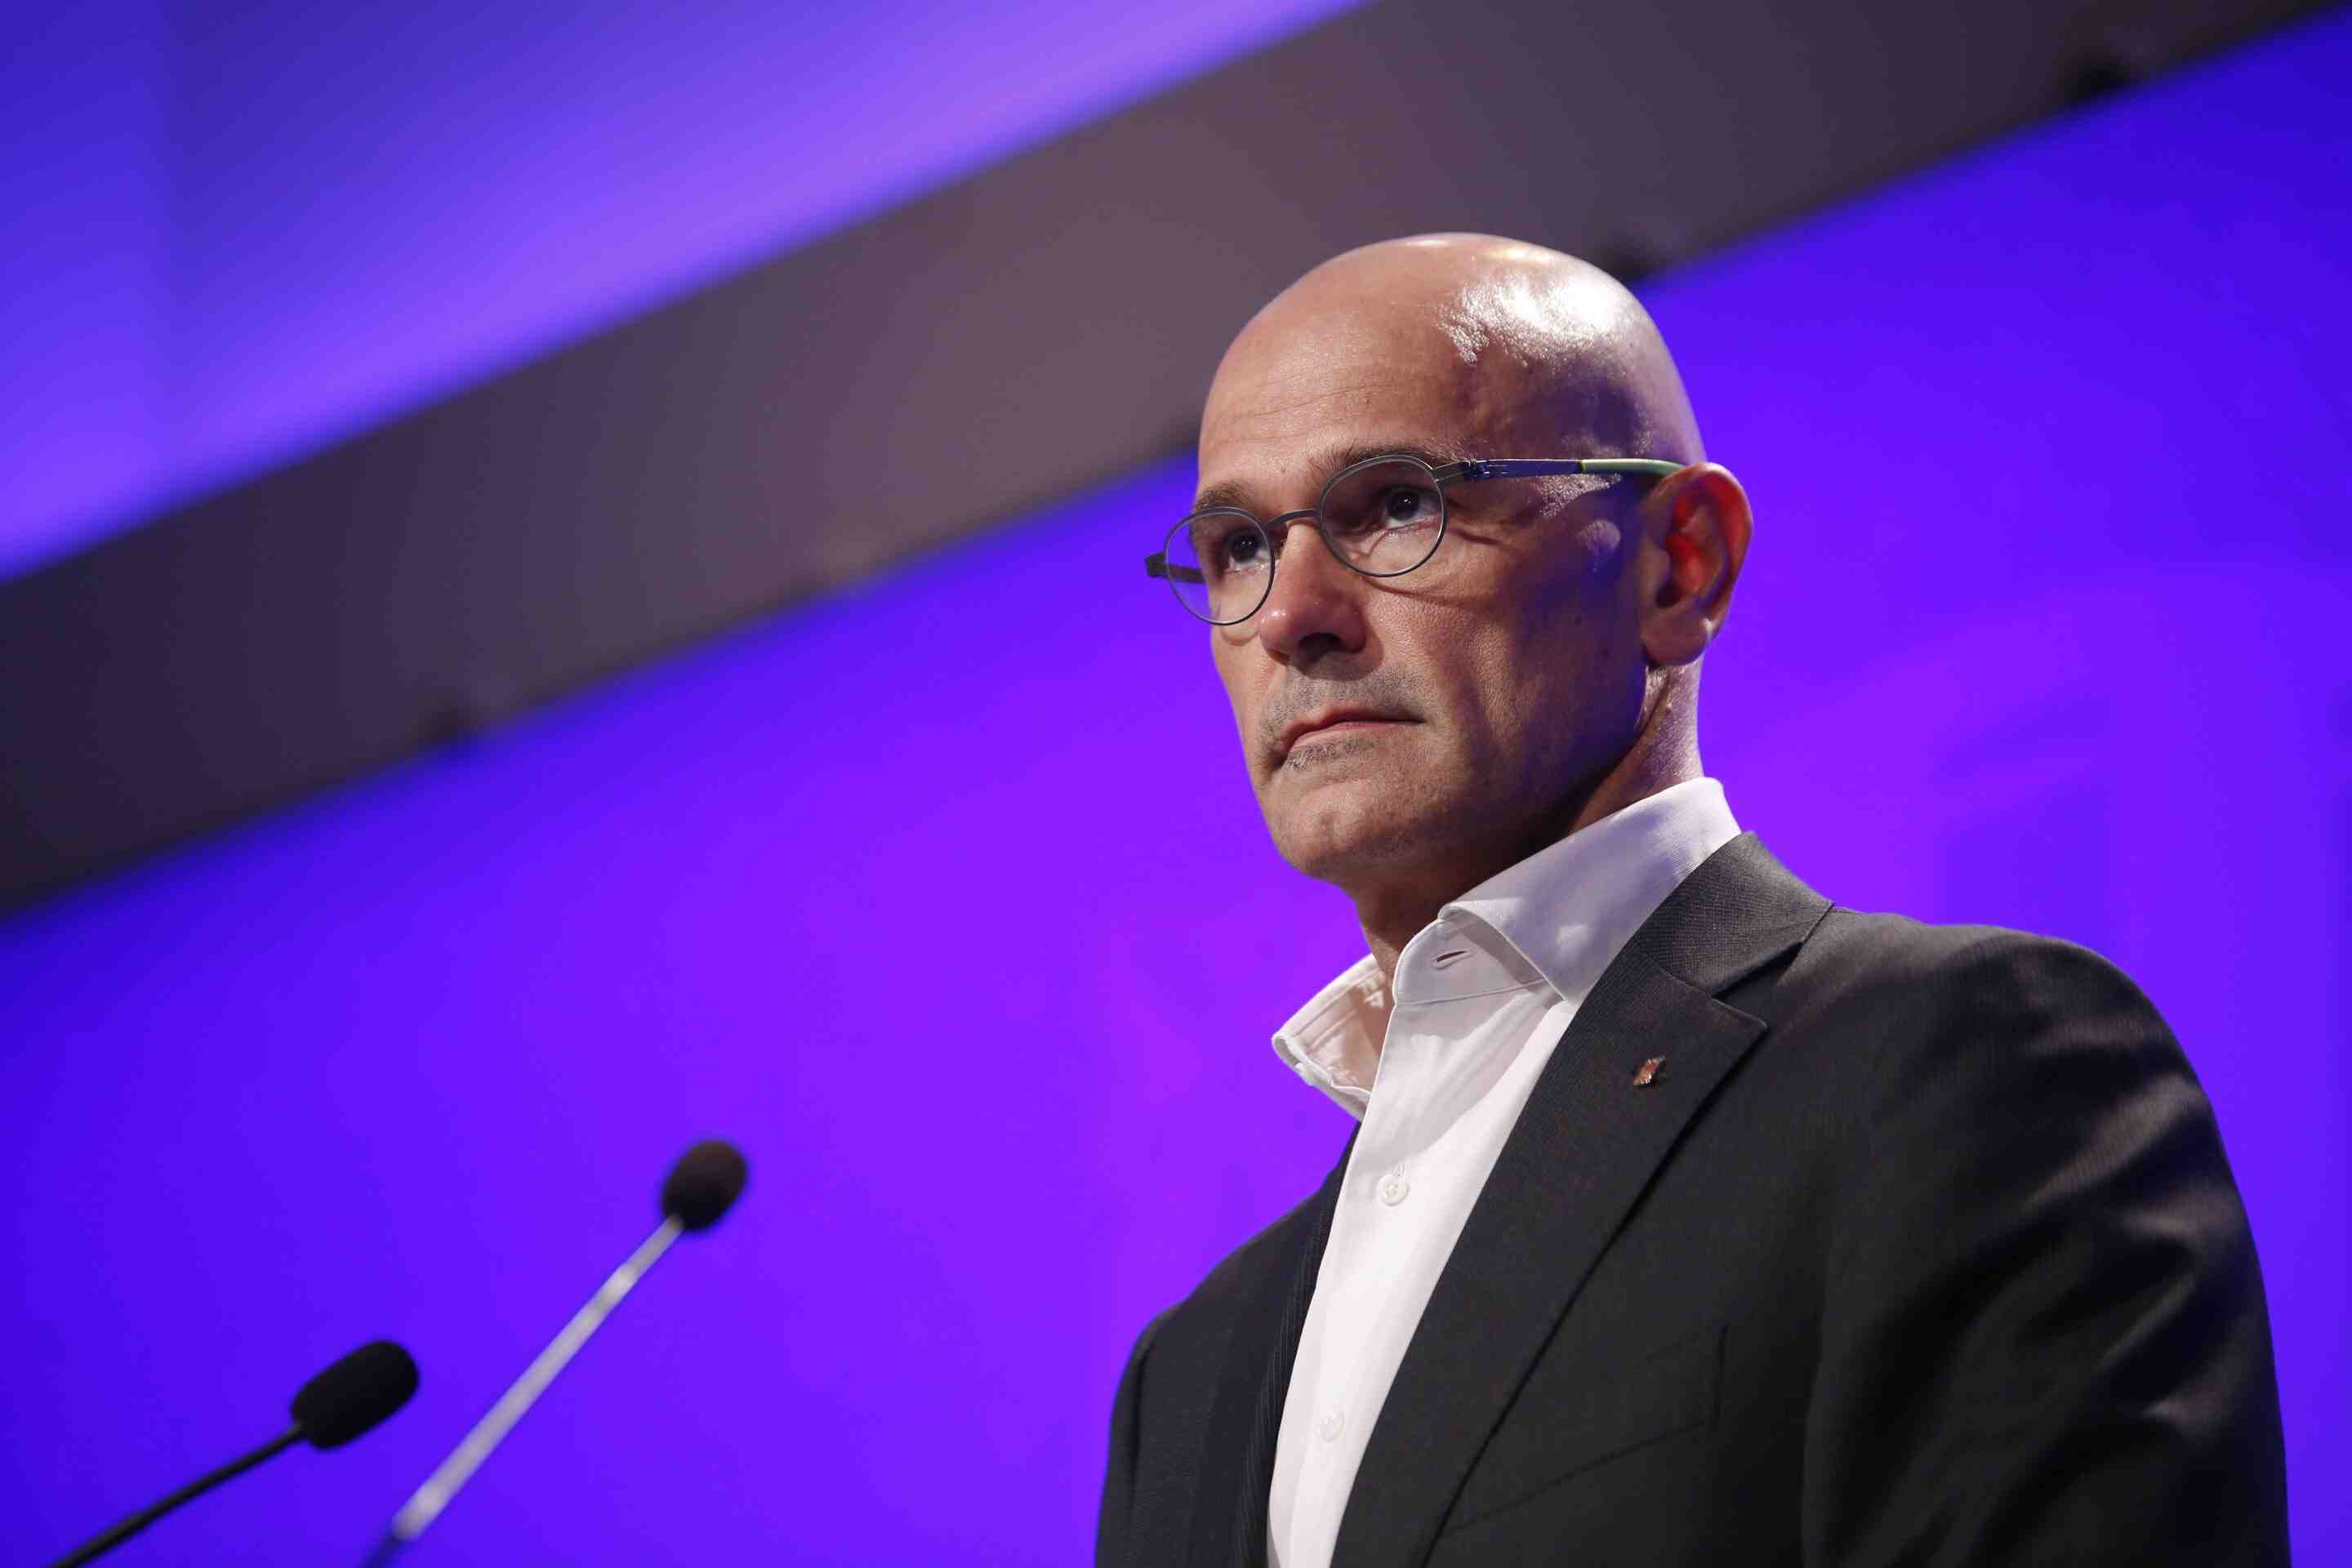 Referendum case audio | Romeva: "We were working based on a popular mandate, not a road map"